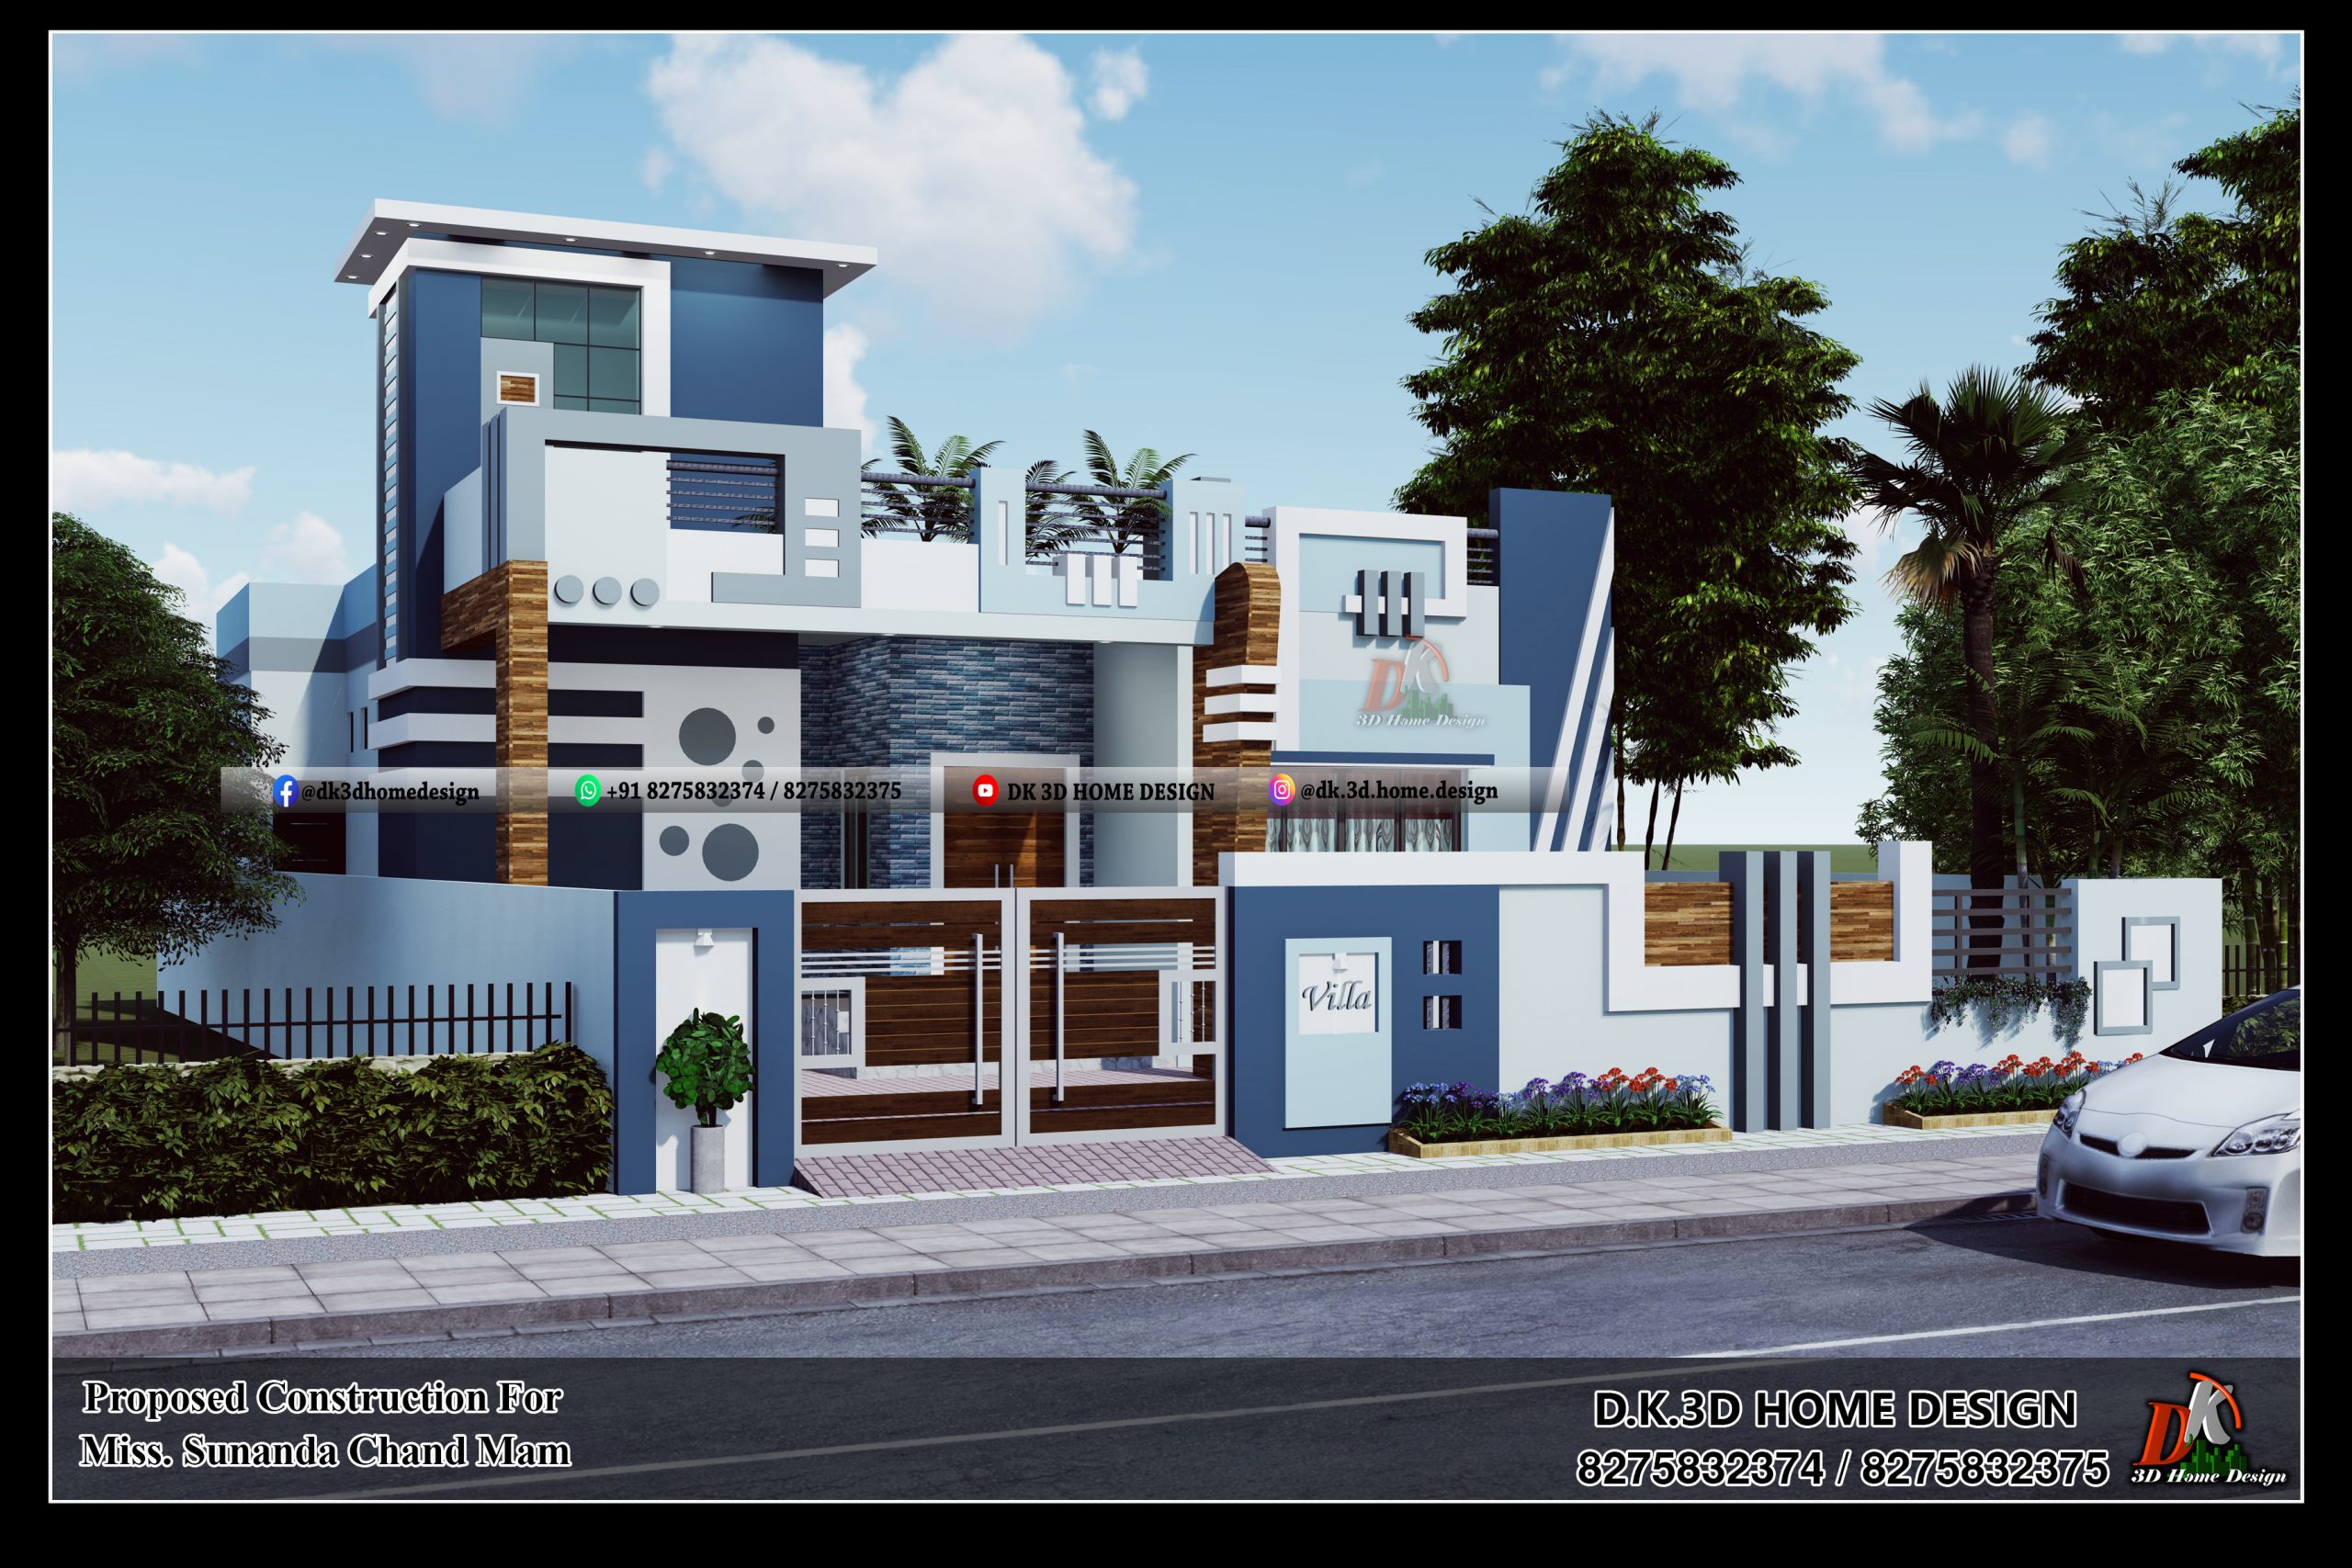 3 bedroom house exterior color combination